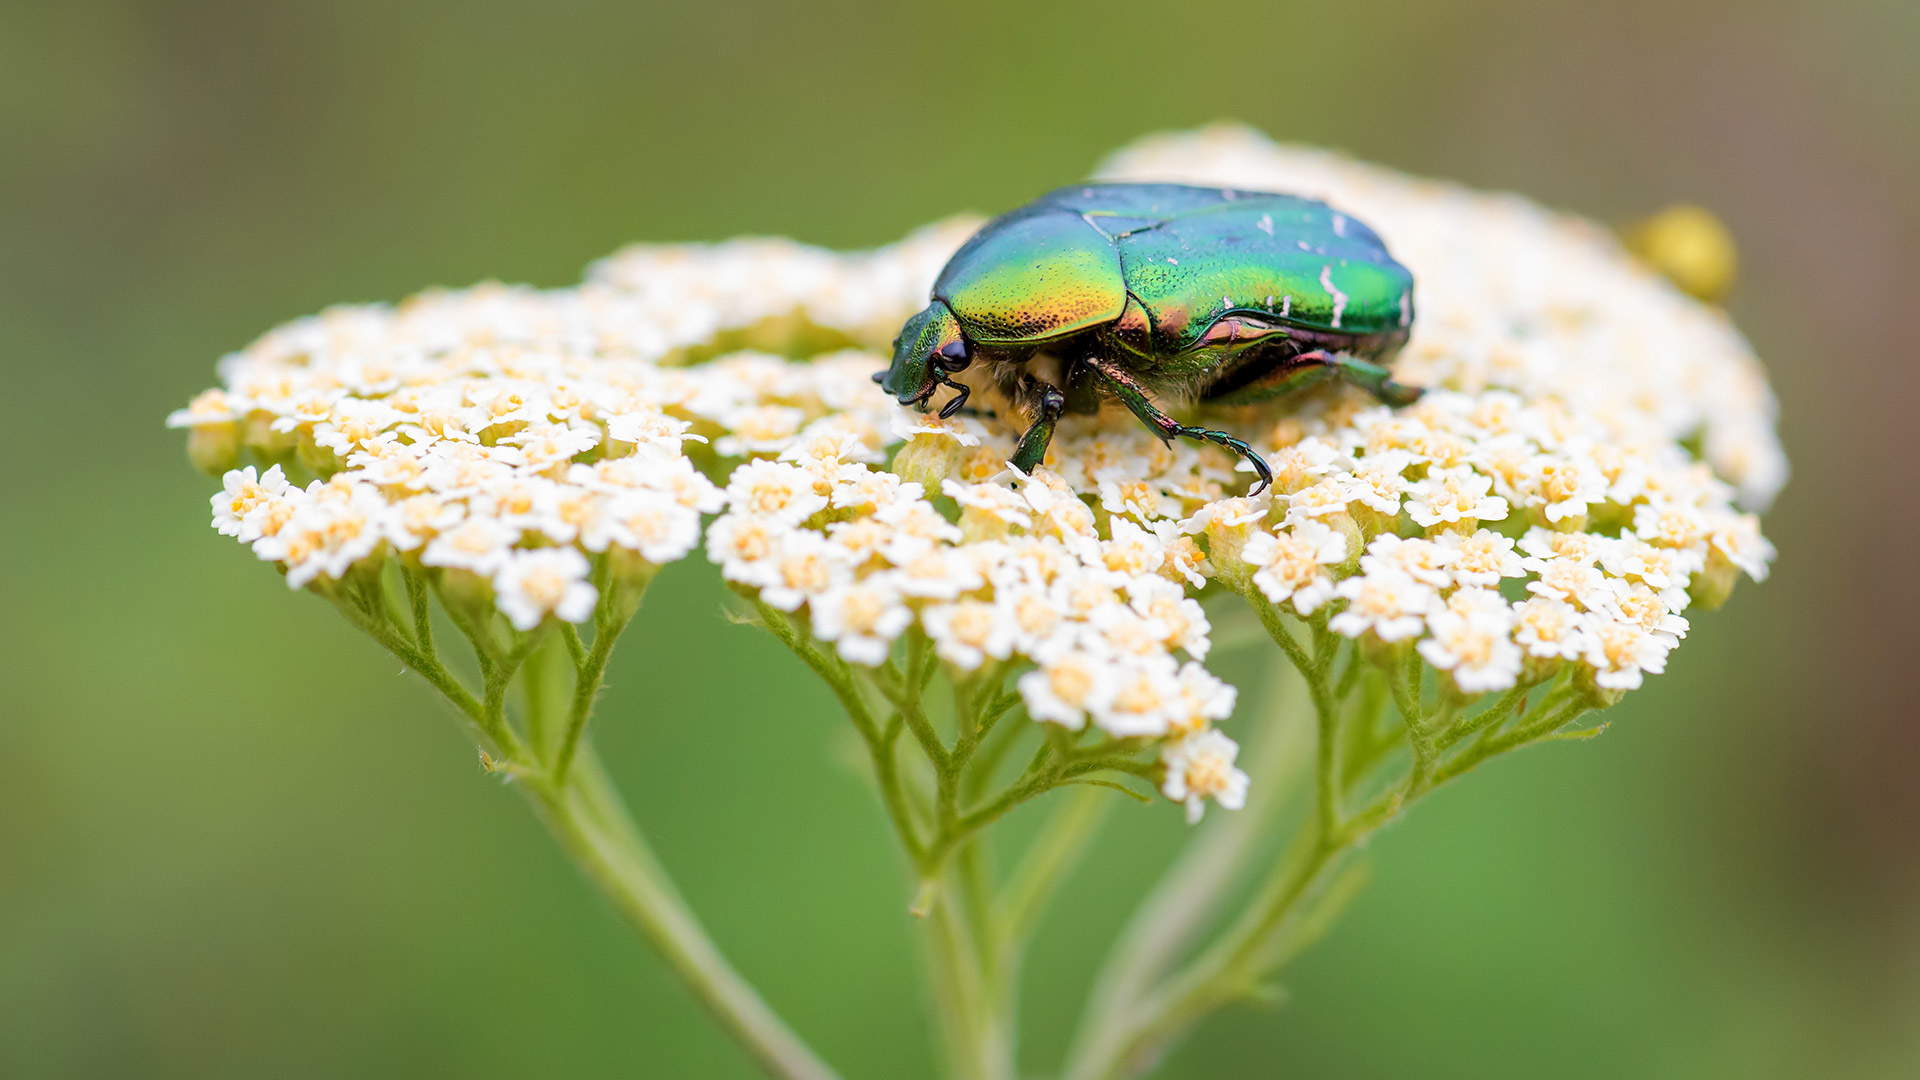 A European chafer beetle on top of a flower near Shelby, MI.